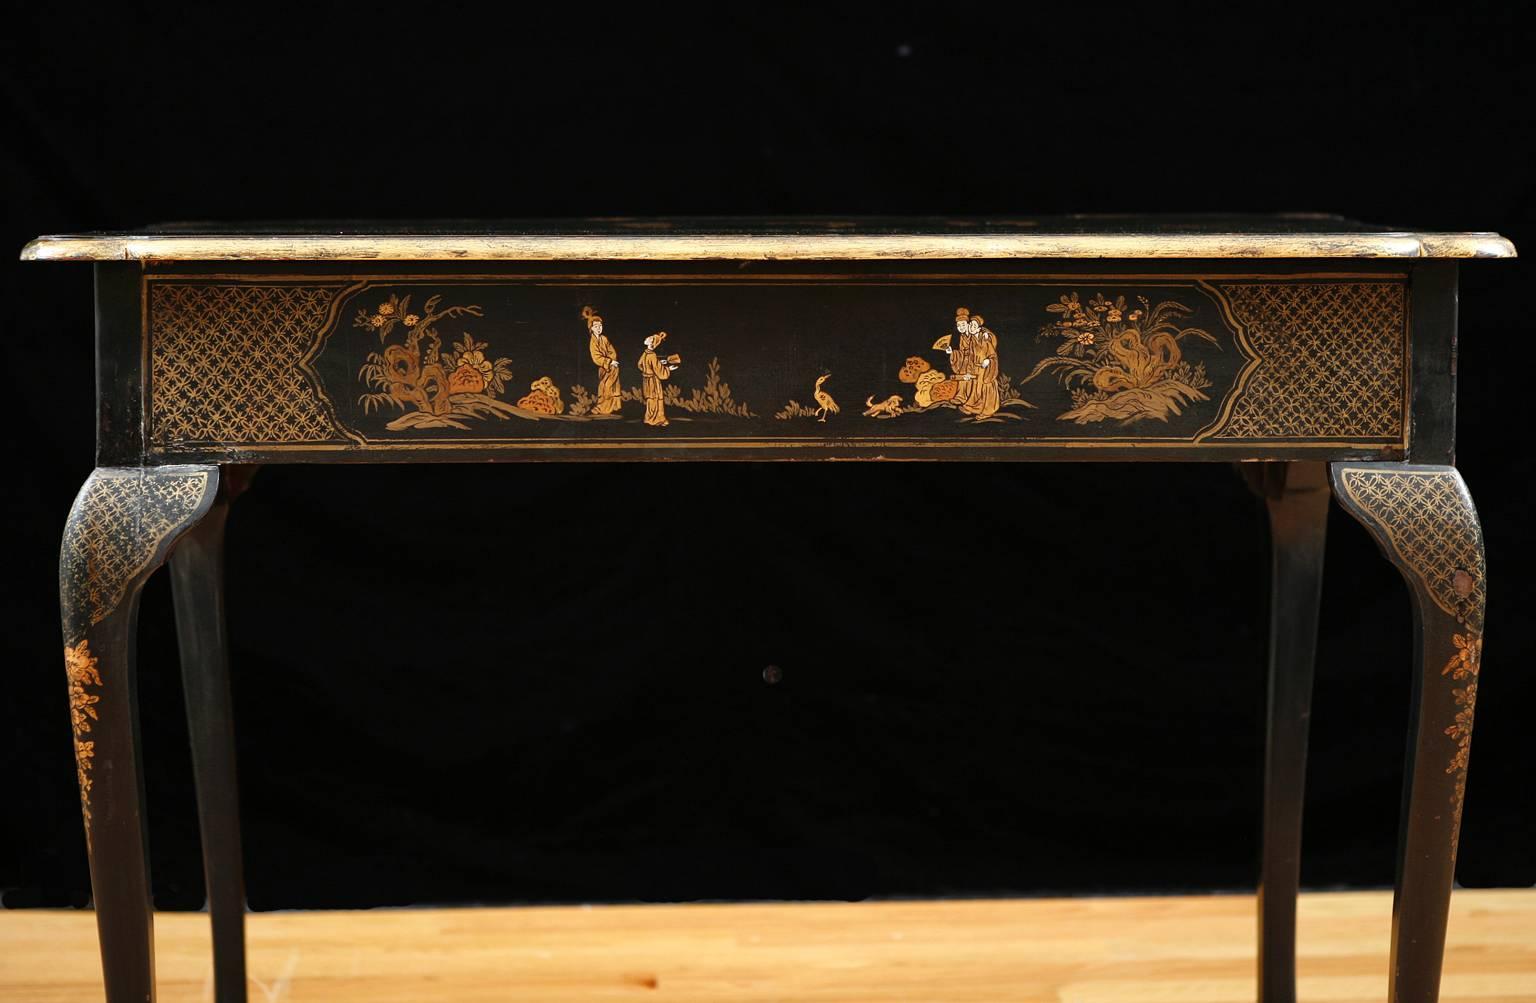 Chinese Chippendale 19th Century Black Lacquered Chinoiserie Tea Table with Painted Scenes